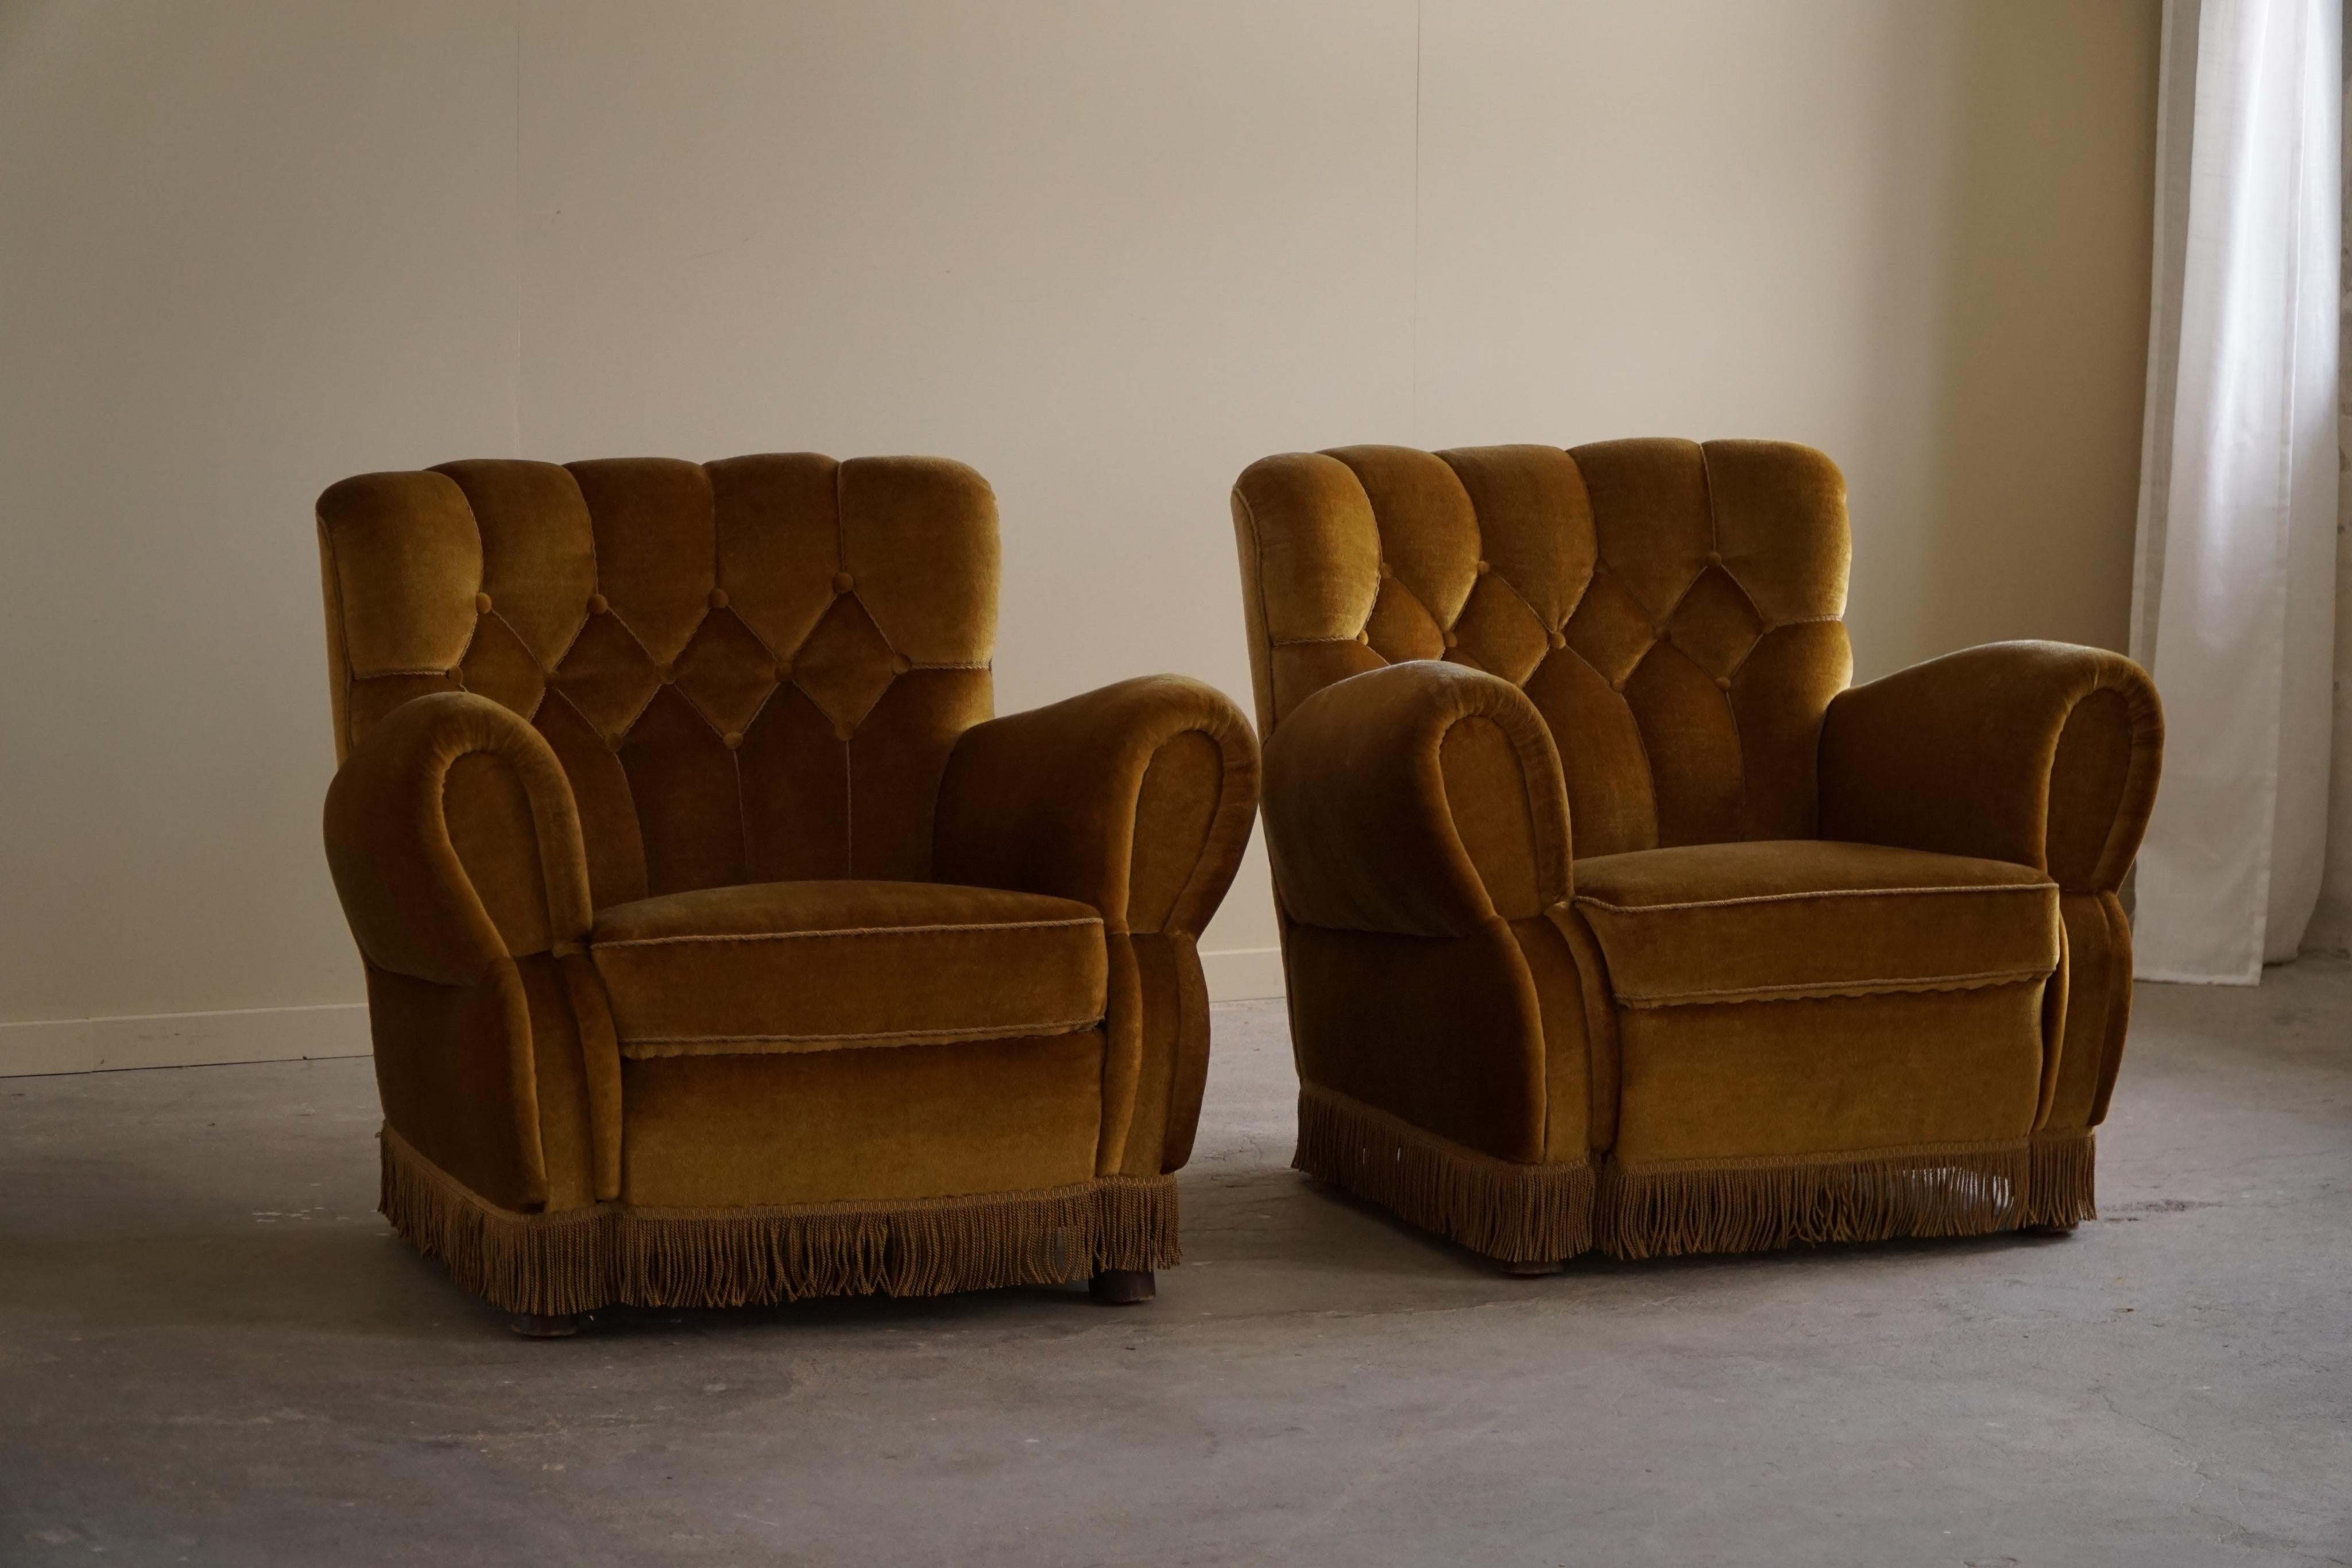 20th Century A Pair of Art Deco Lounge Chairs in Yellow Velour, Danish Carbinetmaker, 1940s For Sale